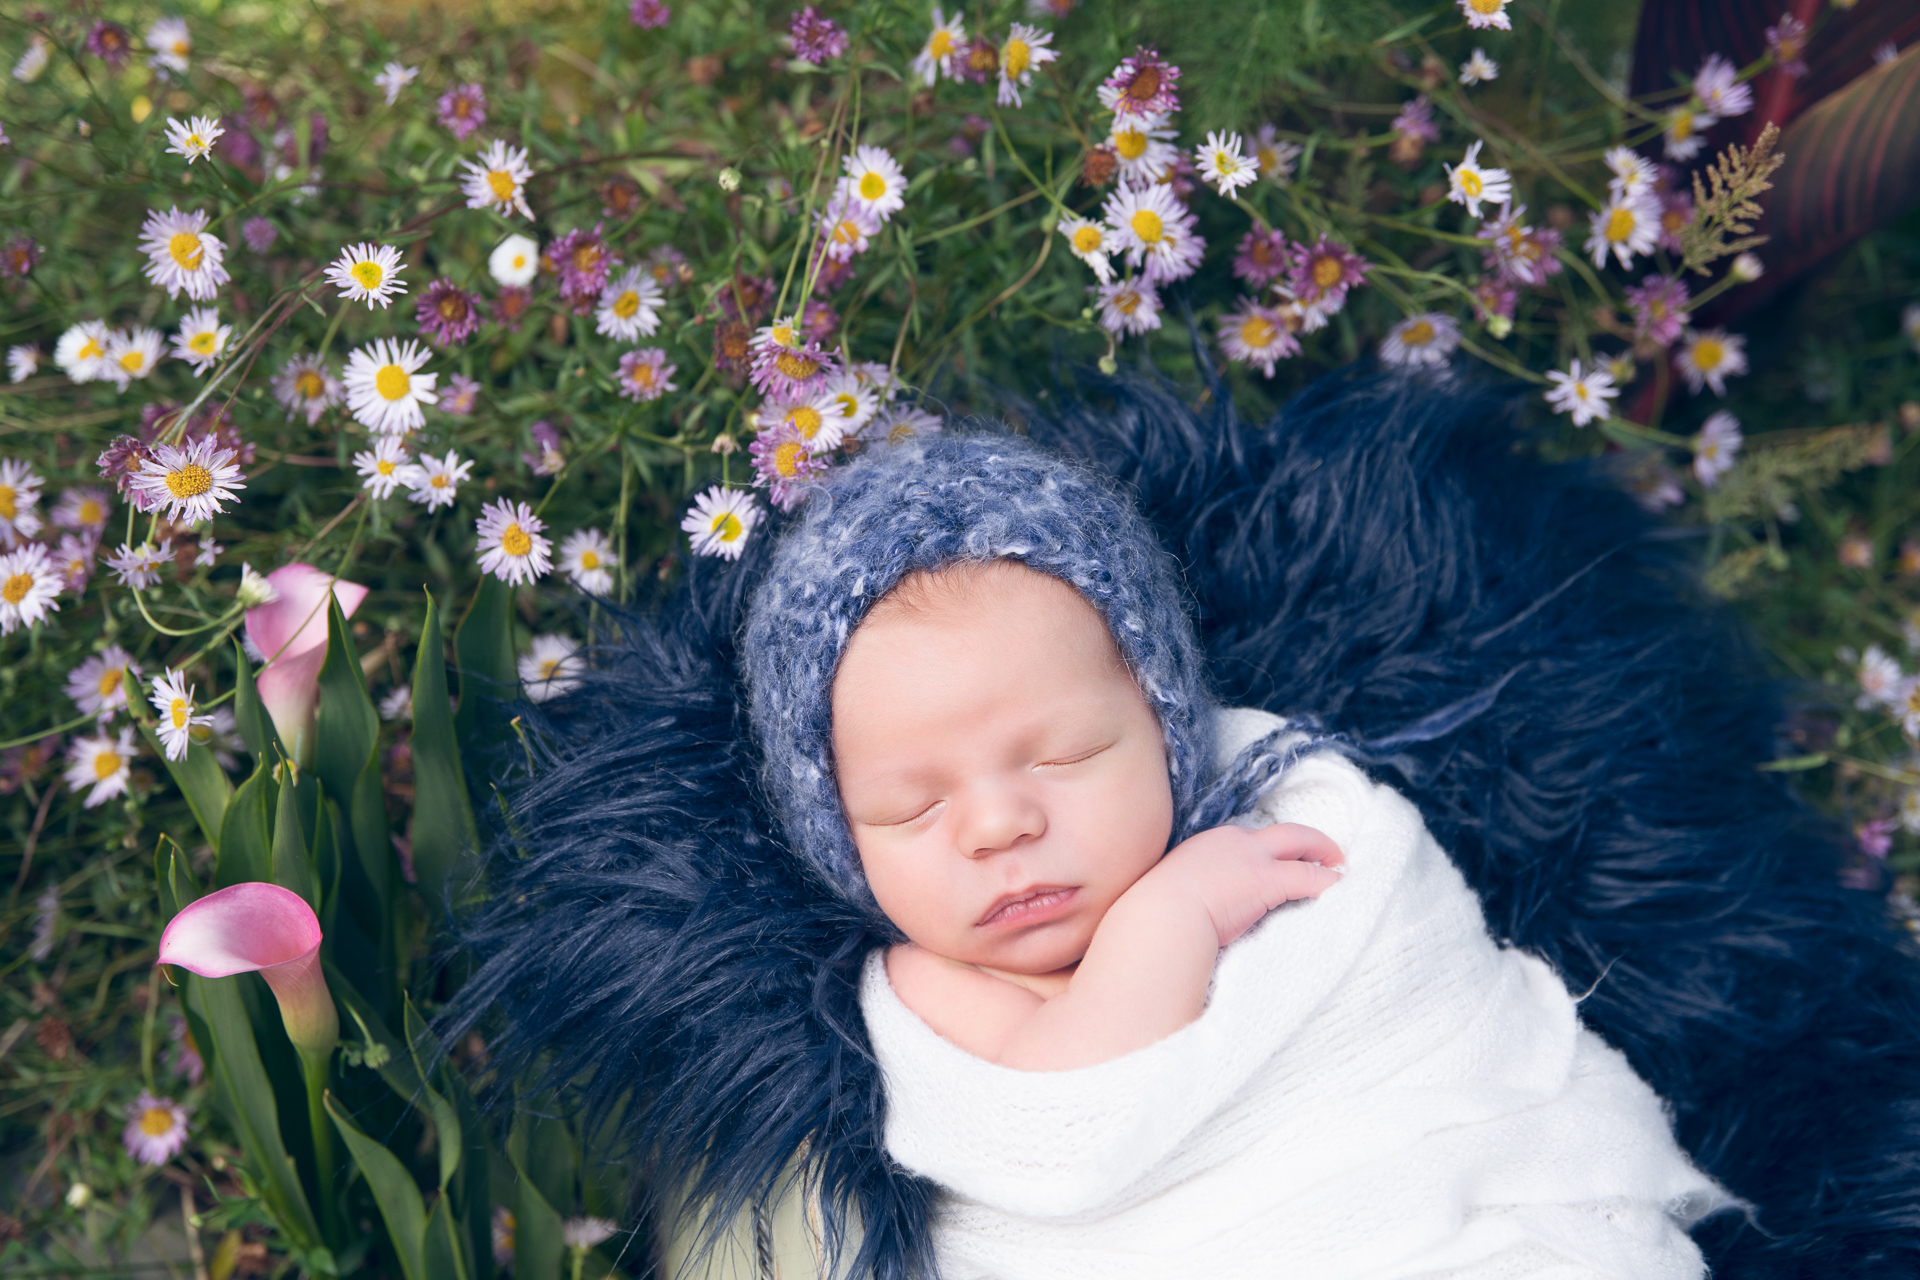 Newborn baby girl rests on wood heart shaped prop outdoors during fall season. Blurry background.